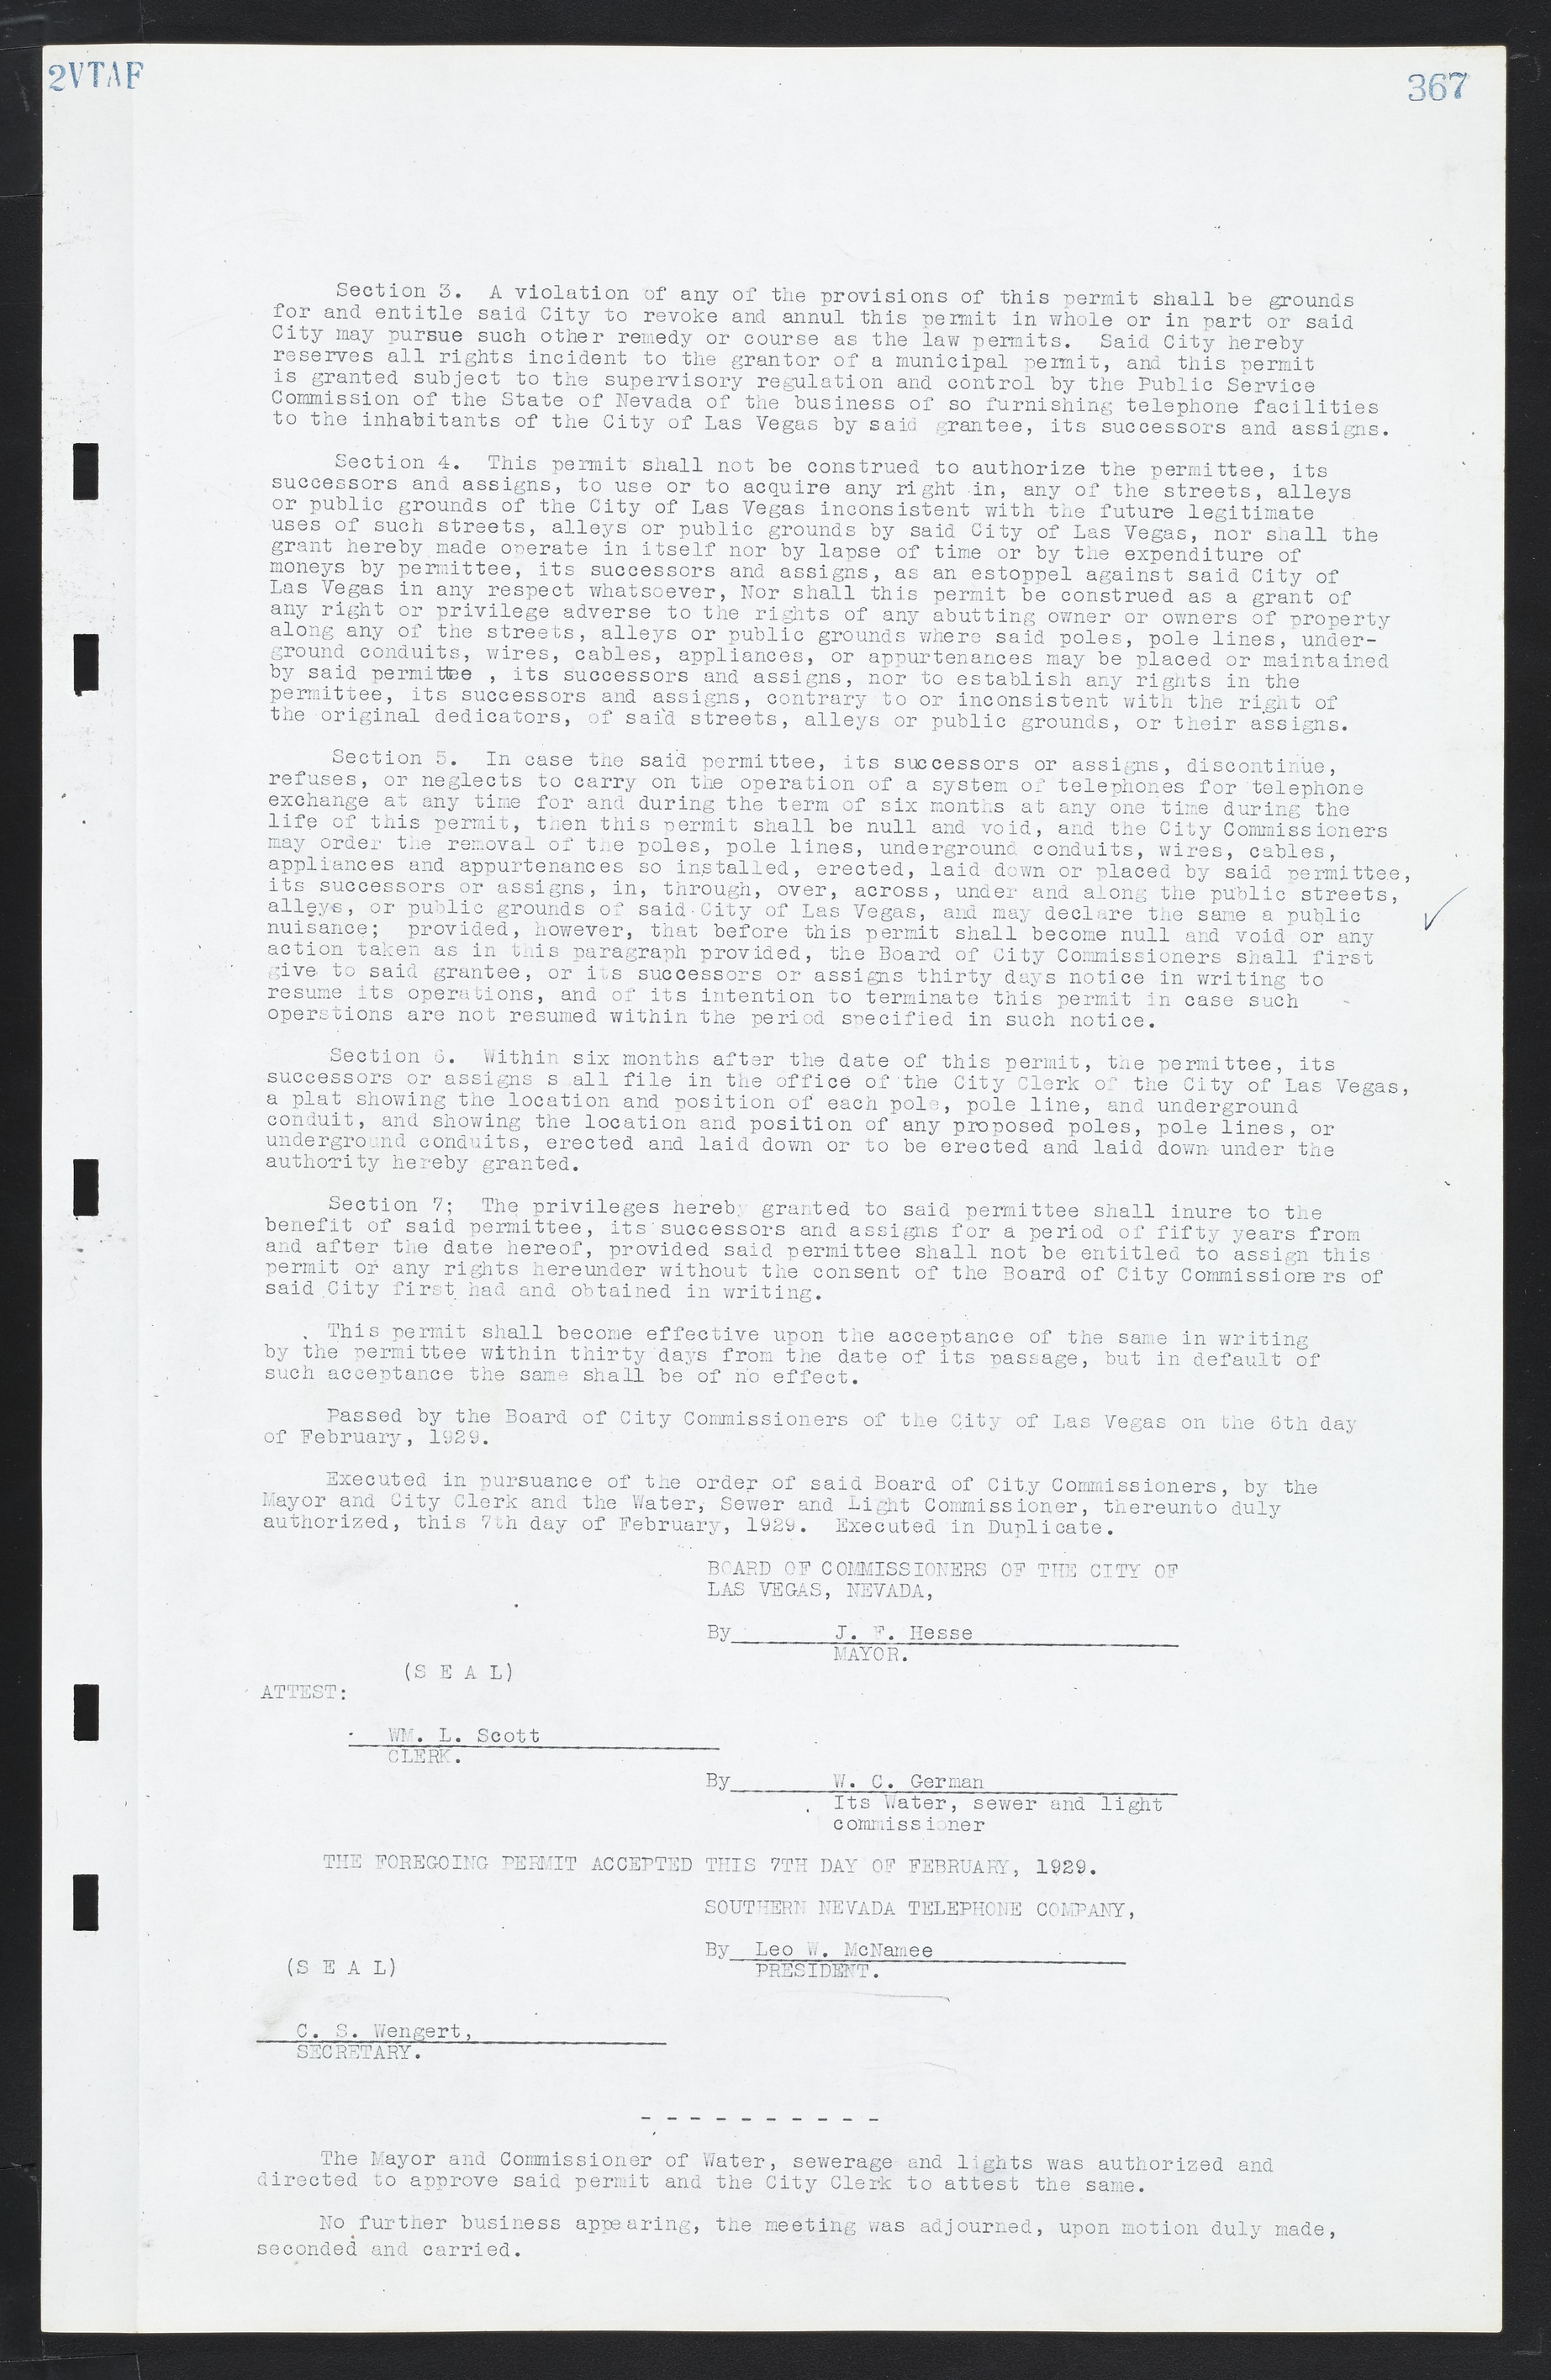 Las Vegas City Commission Minutes, March 1, 1922 to May 10, 1929, lvc000002-376